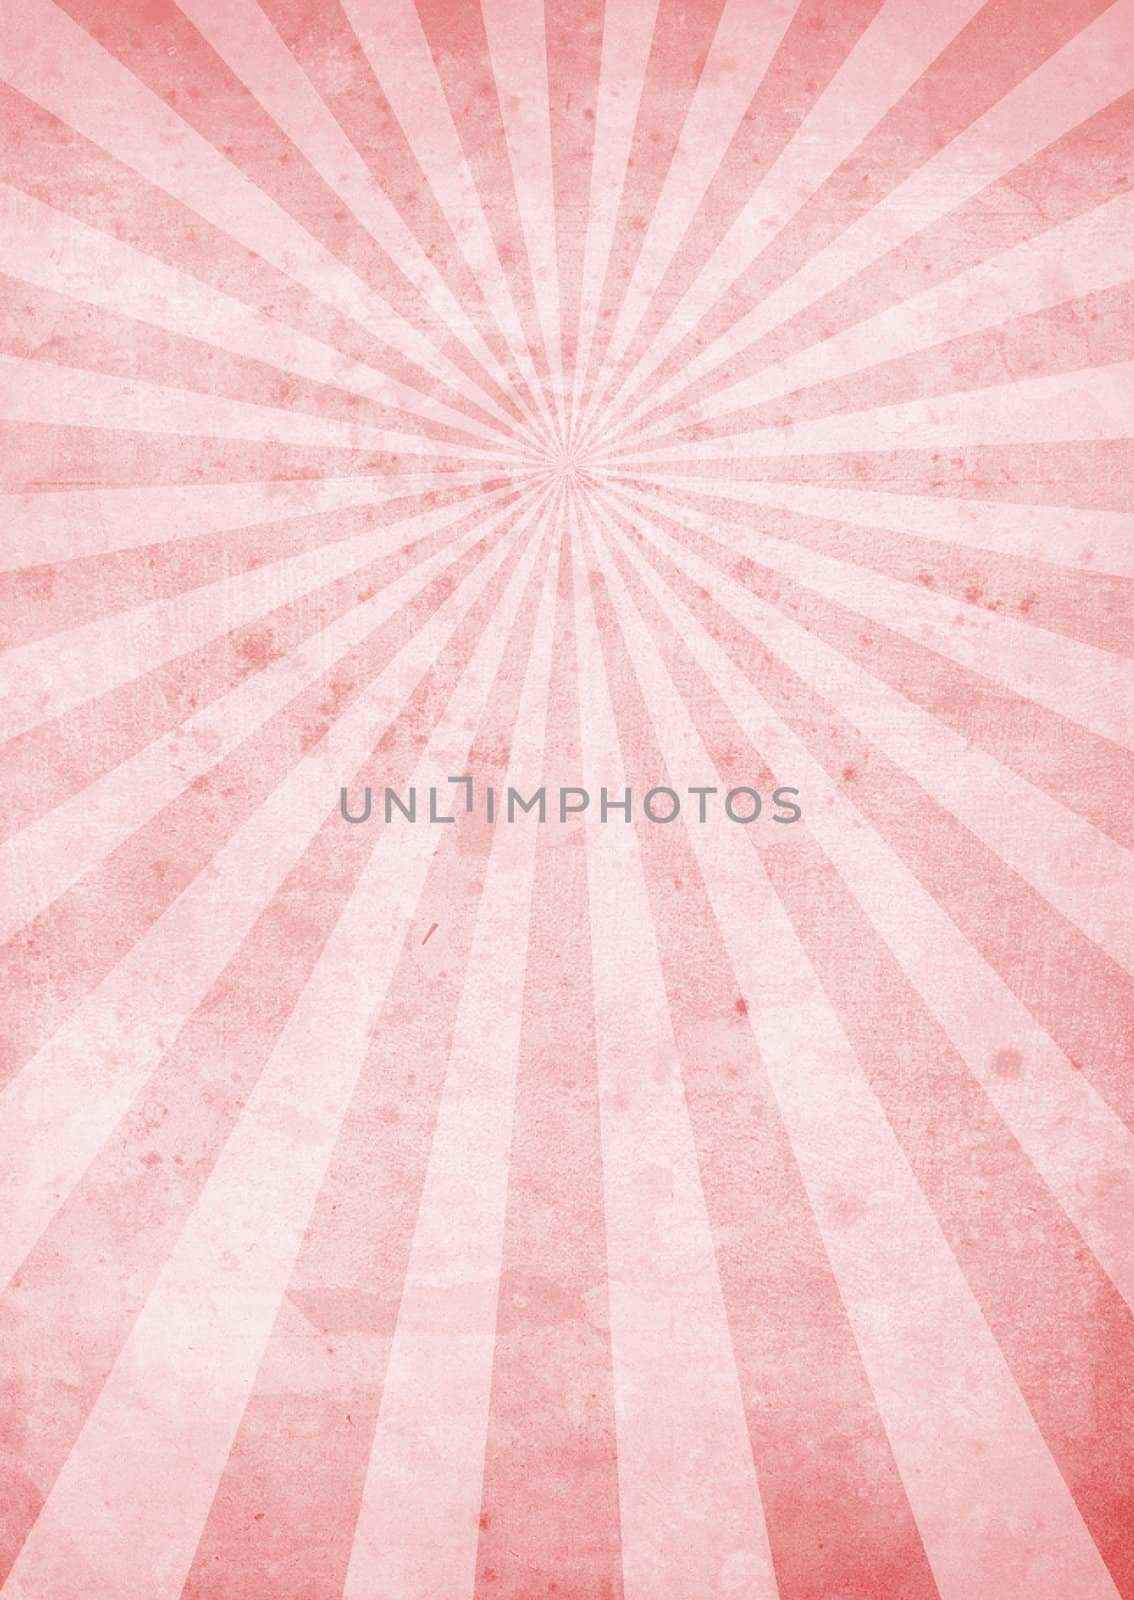 red and pink radiating background with a weathered look